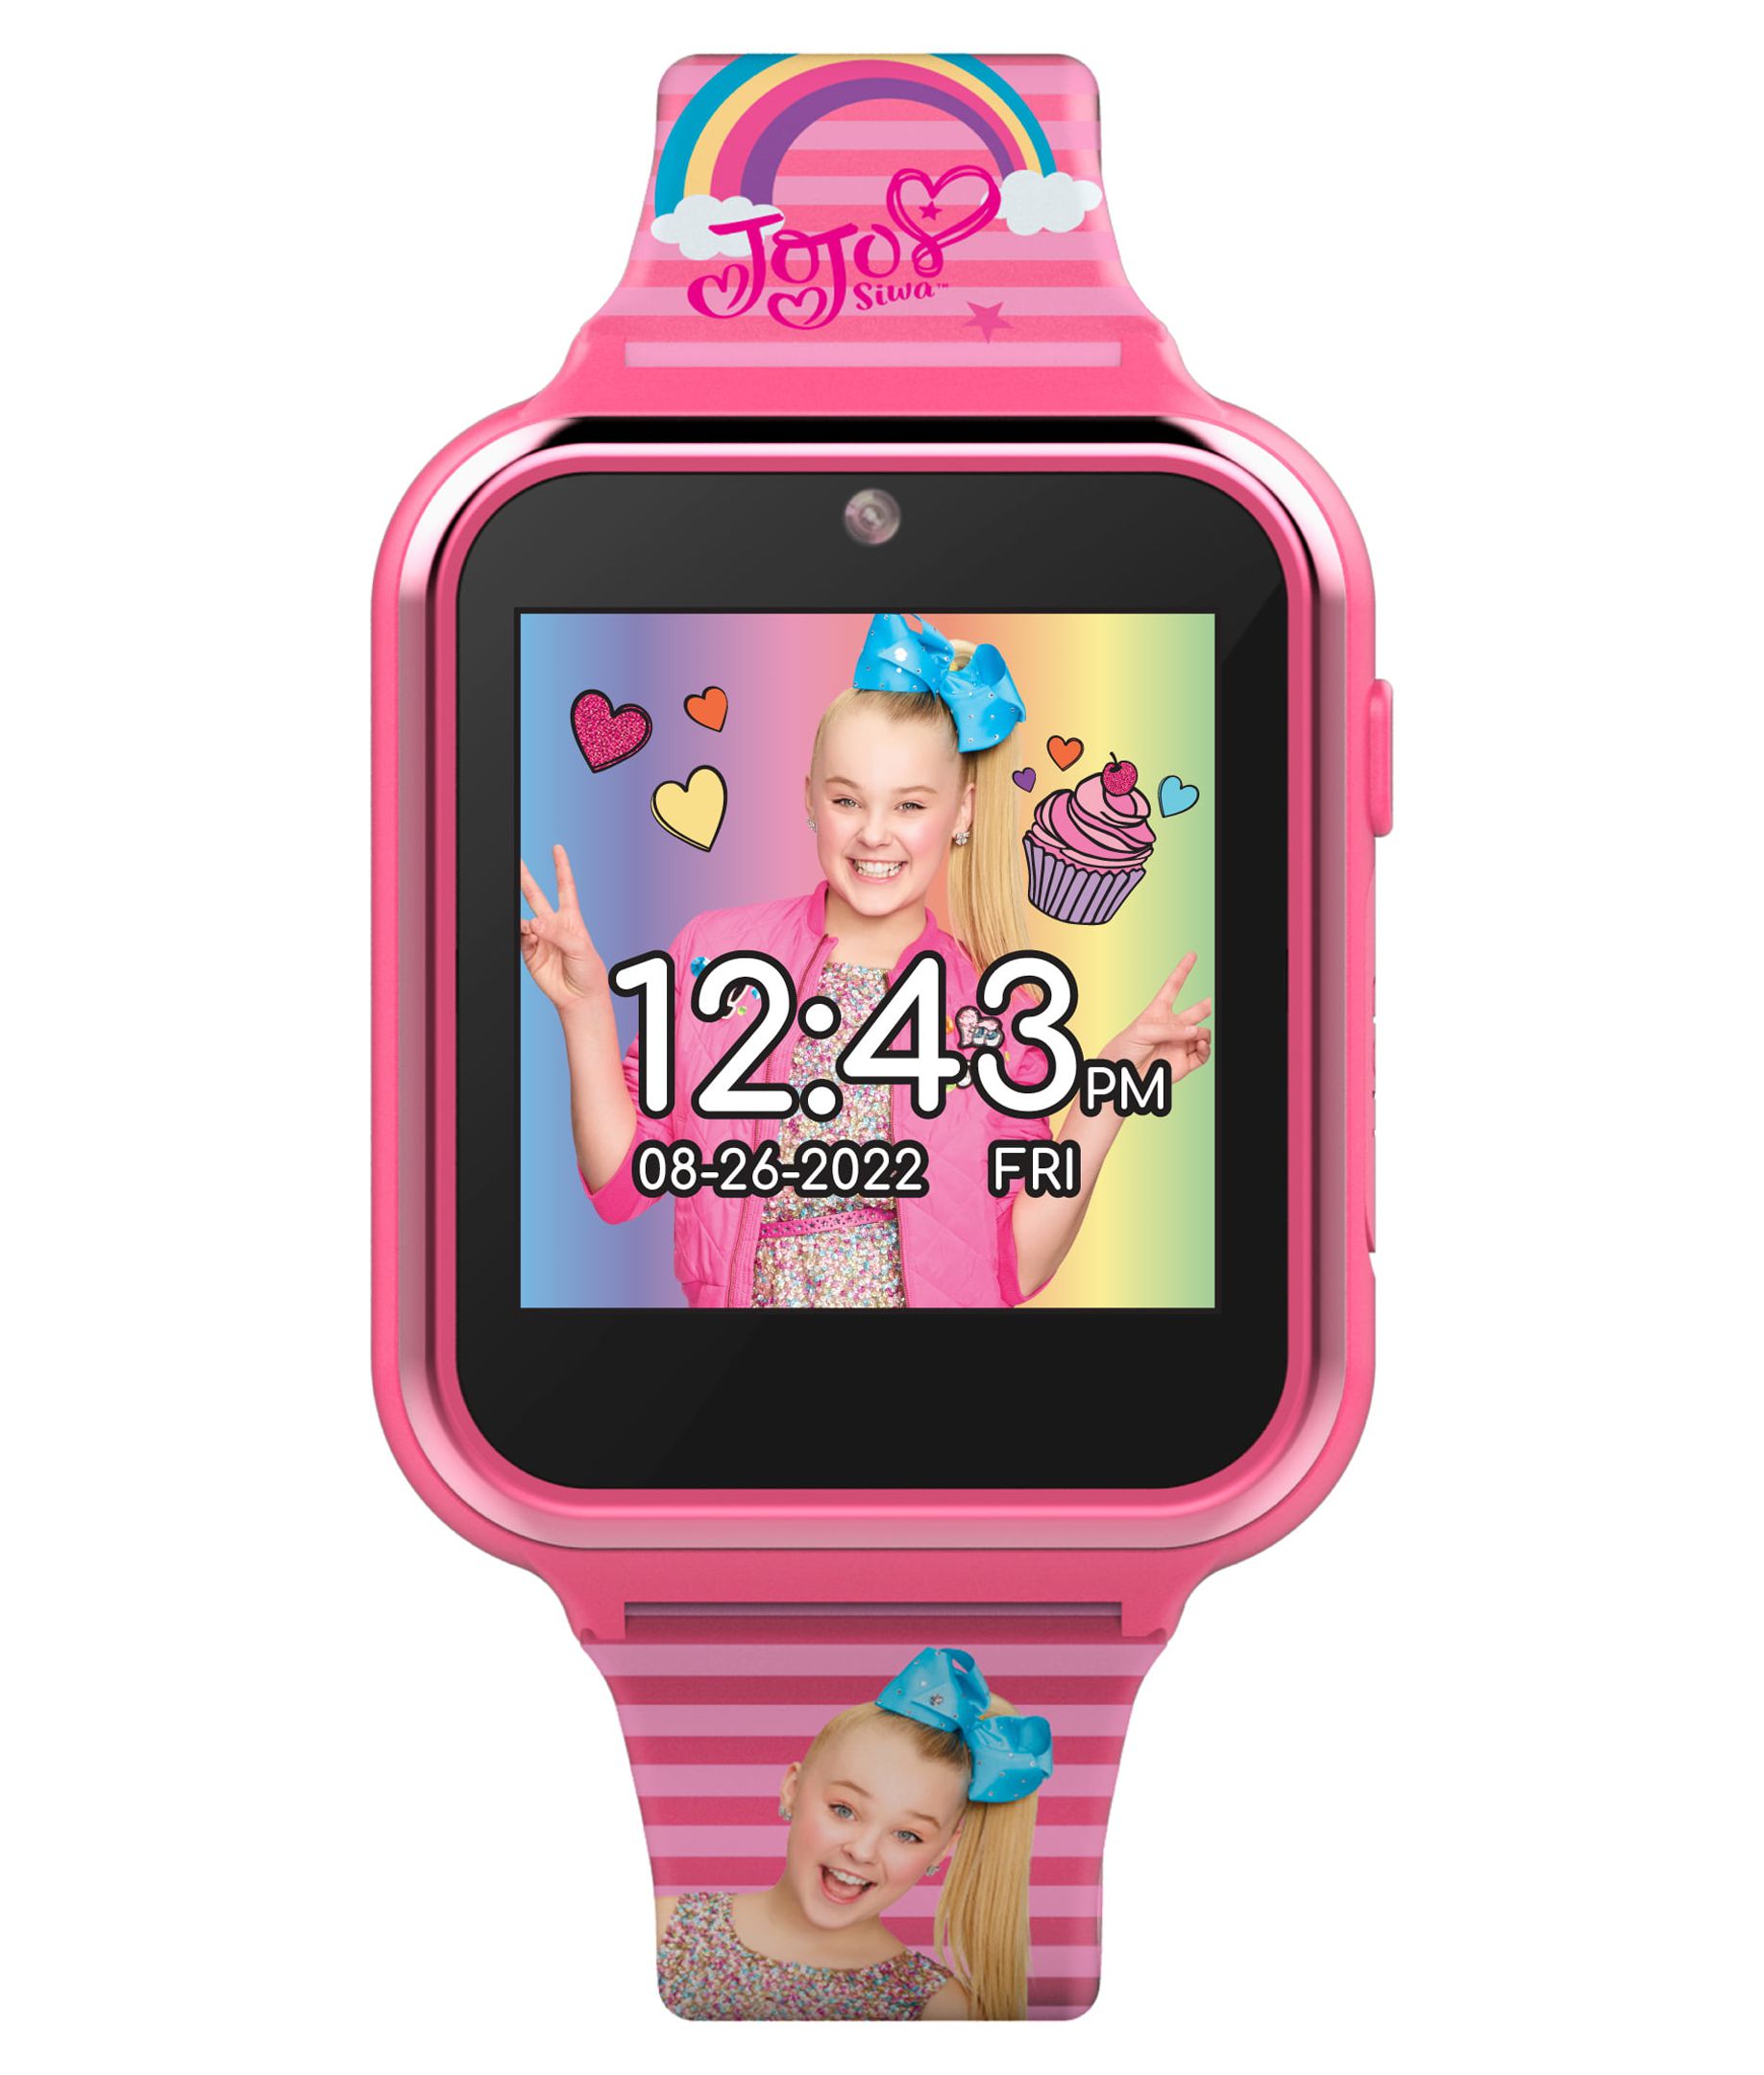 Jojo Siwa iTime Unisex Child Interactive Smart Watch 40mm in Pink with Silicone Strap (JOJ4128) - image 4 of 5